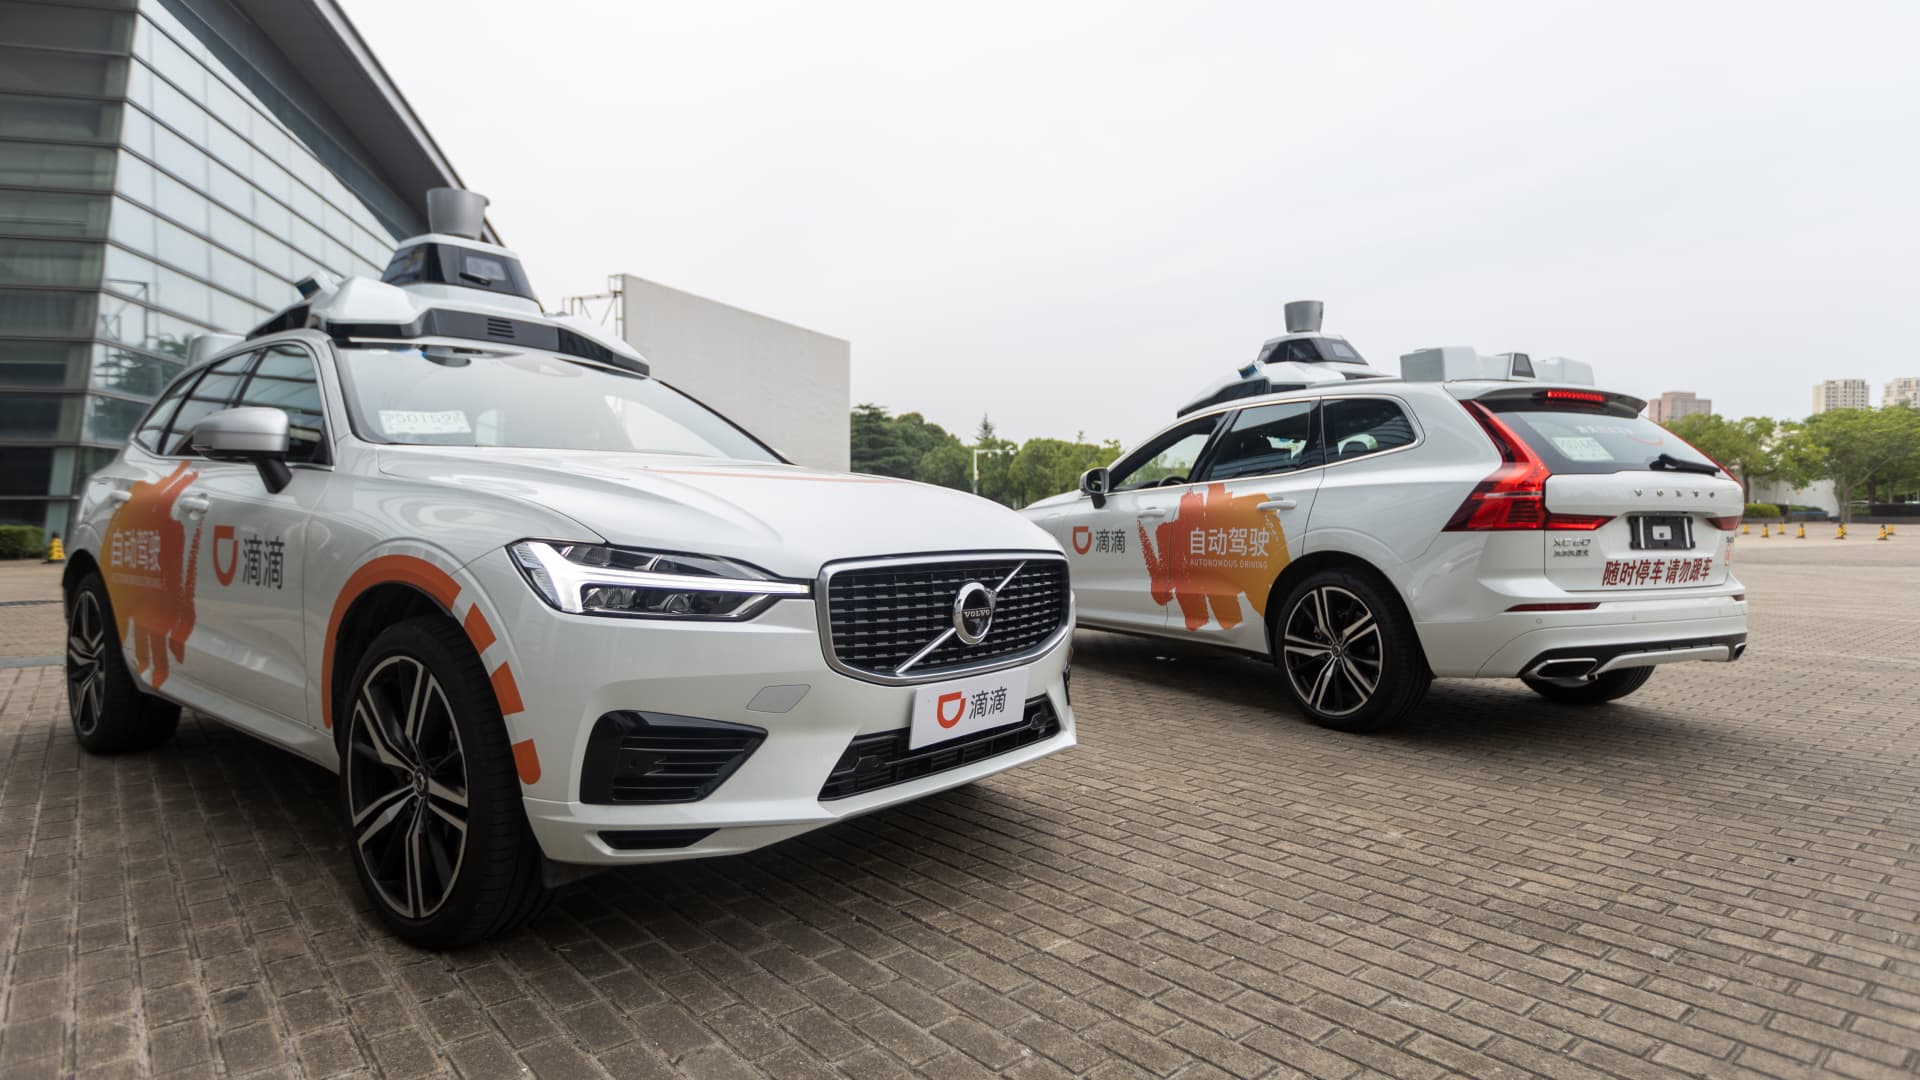 Chinese EV startup Xpeng shares soar after $744 million deal with Didi